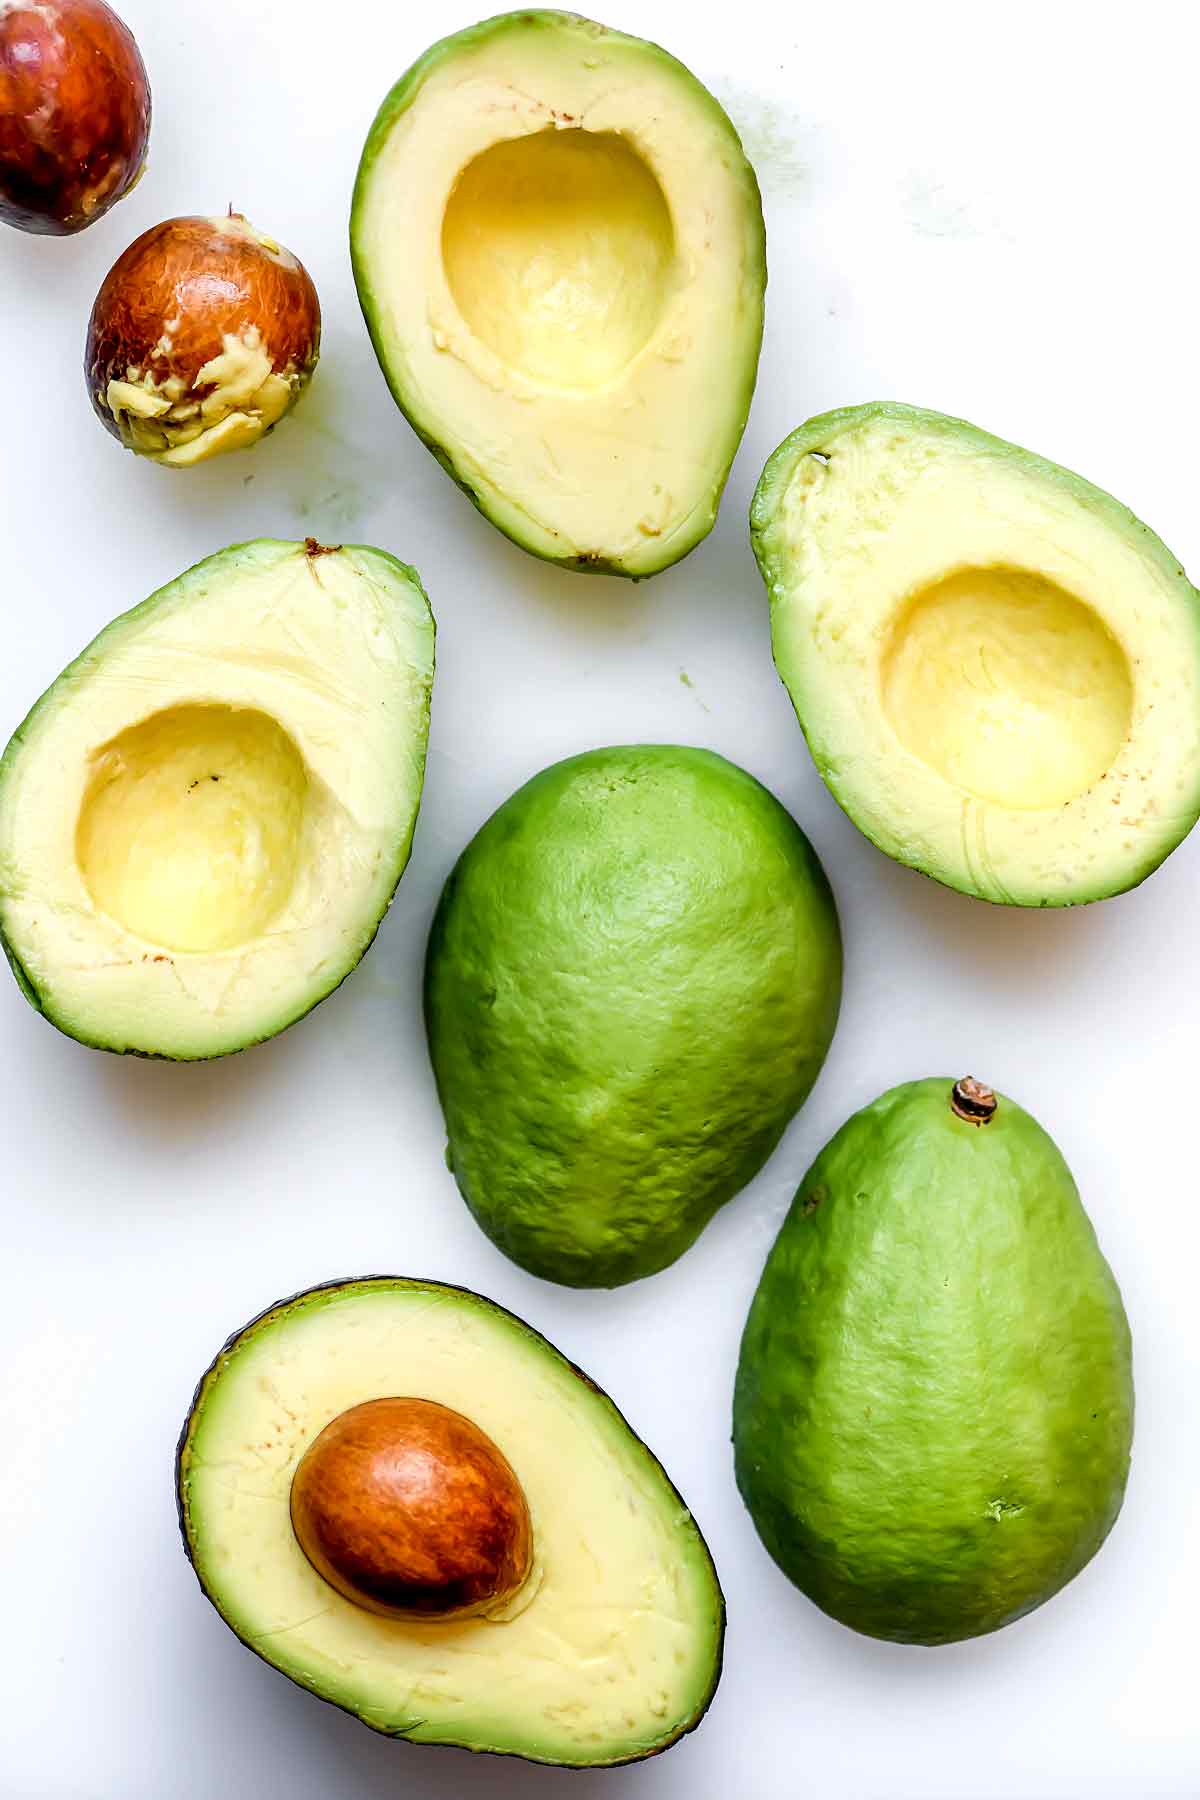 How to Ripen Avocados When You Need Guac and You Need It Now